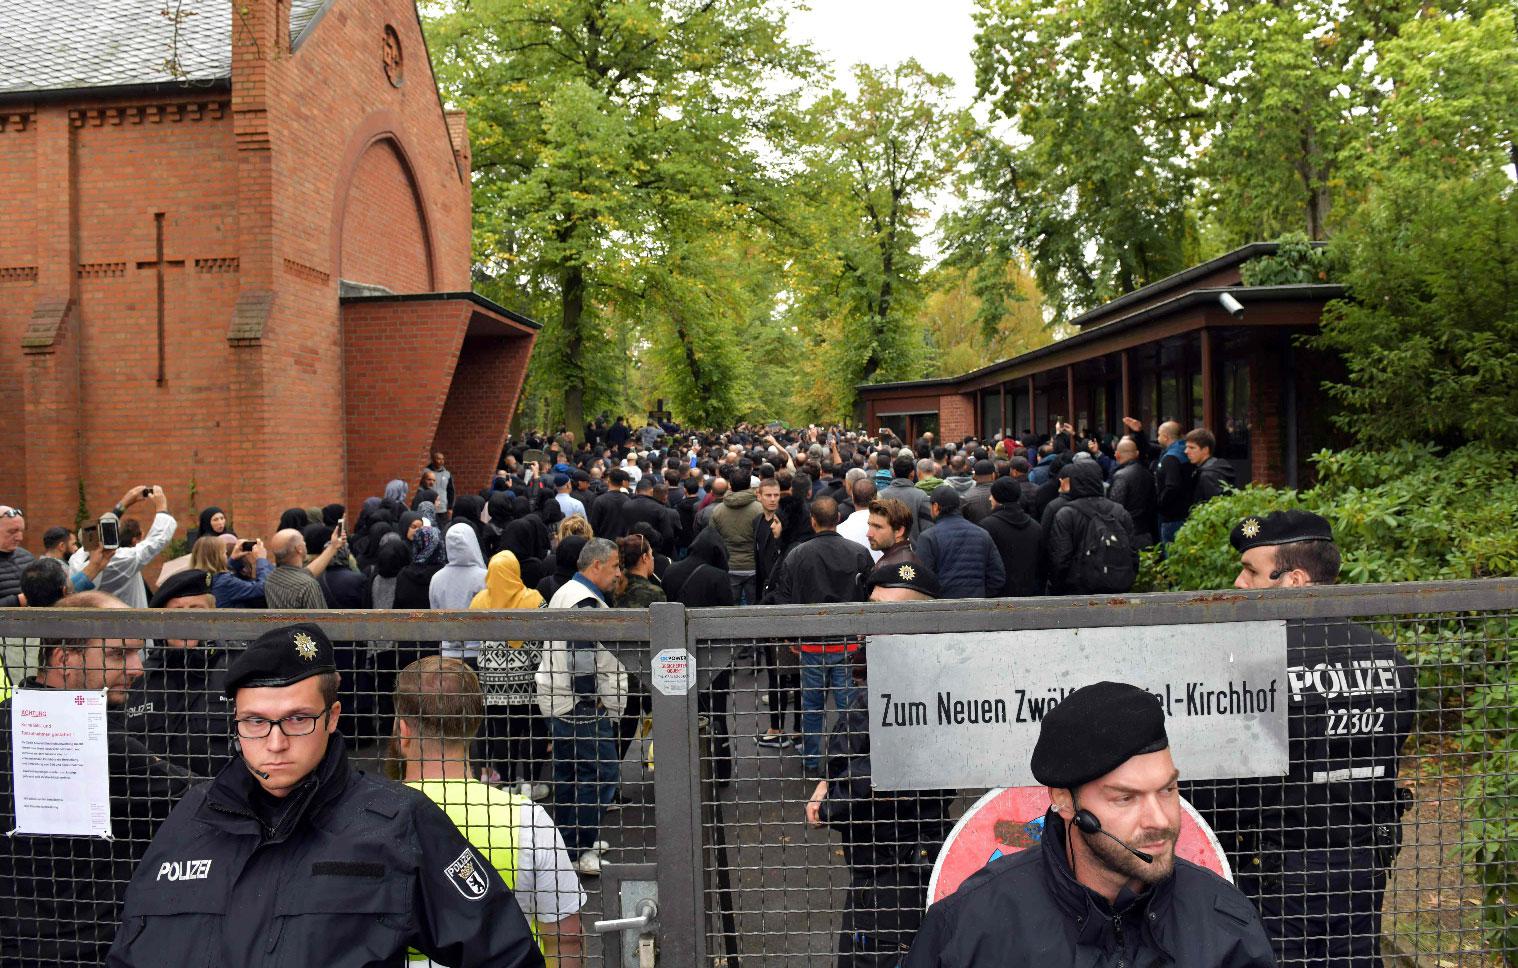 Police secure the area outside the New Twelve Apostle Churchyard where the funeral of shot multiple offender Nidal Rabih takes place in Berlin, on September 13, 2018.